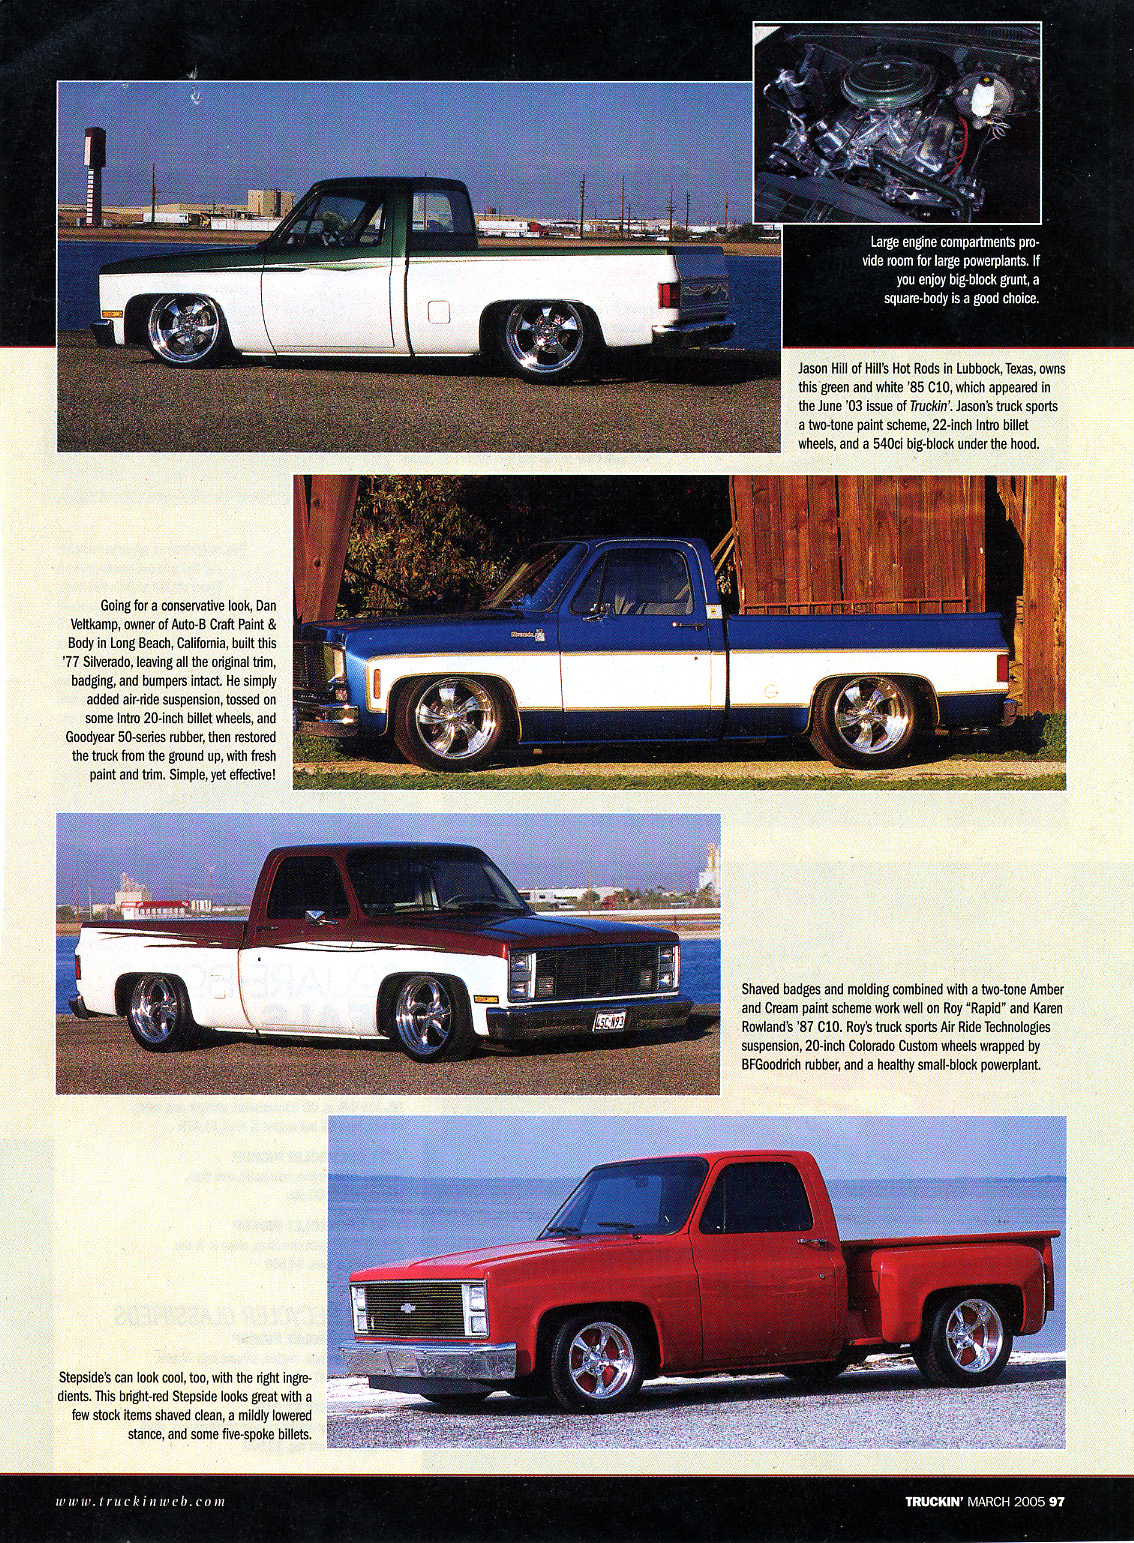 Square Body Revival: The Reemergence of the 73-87 Chevy